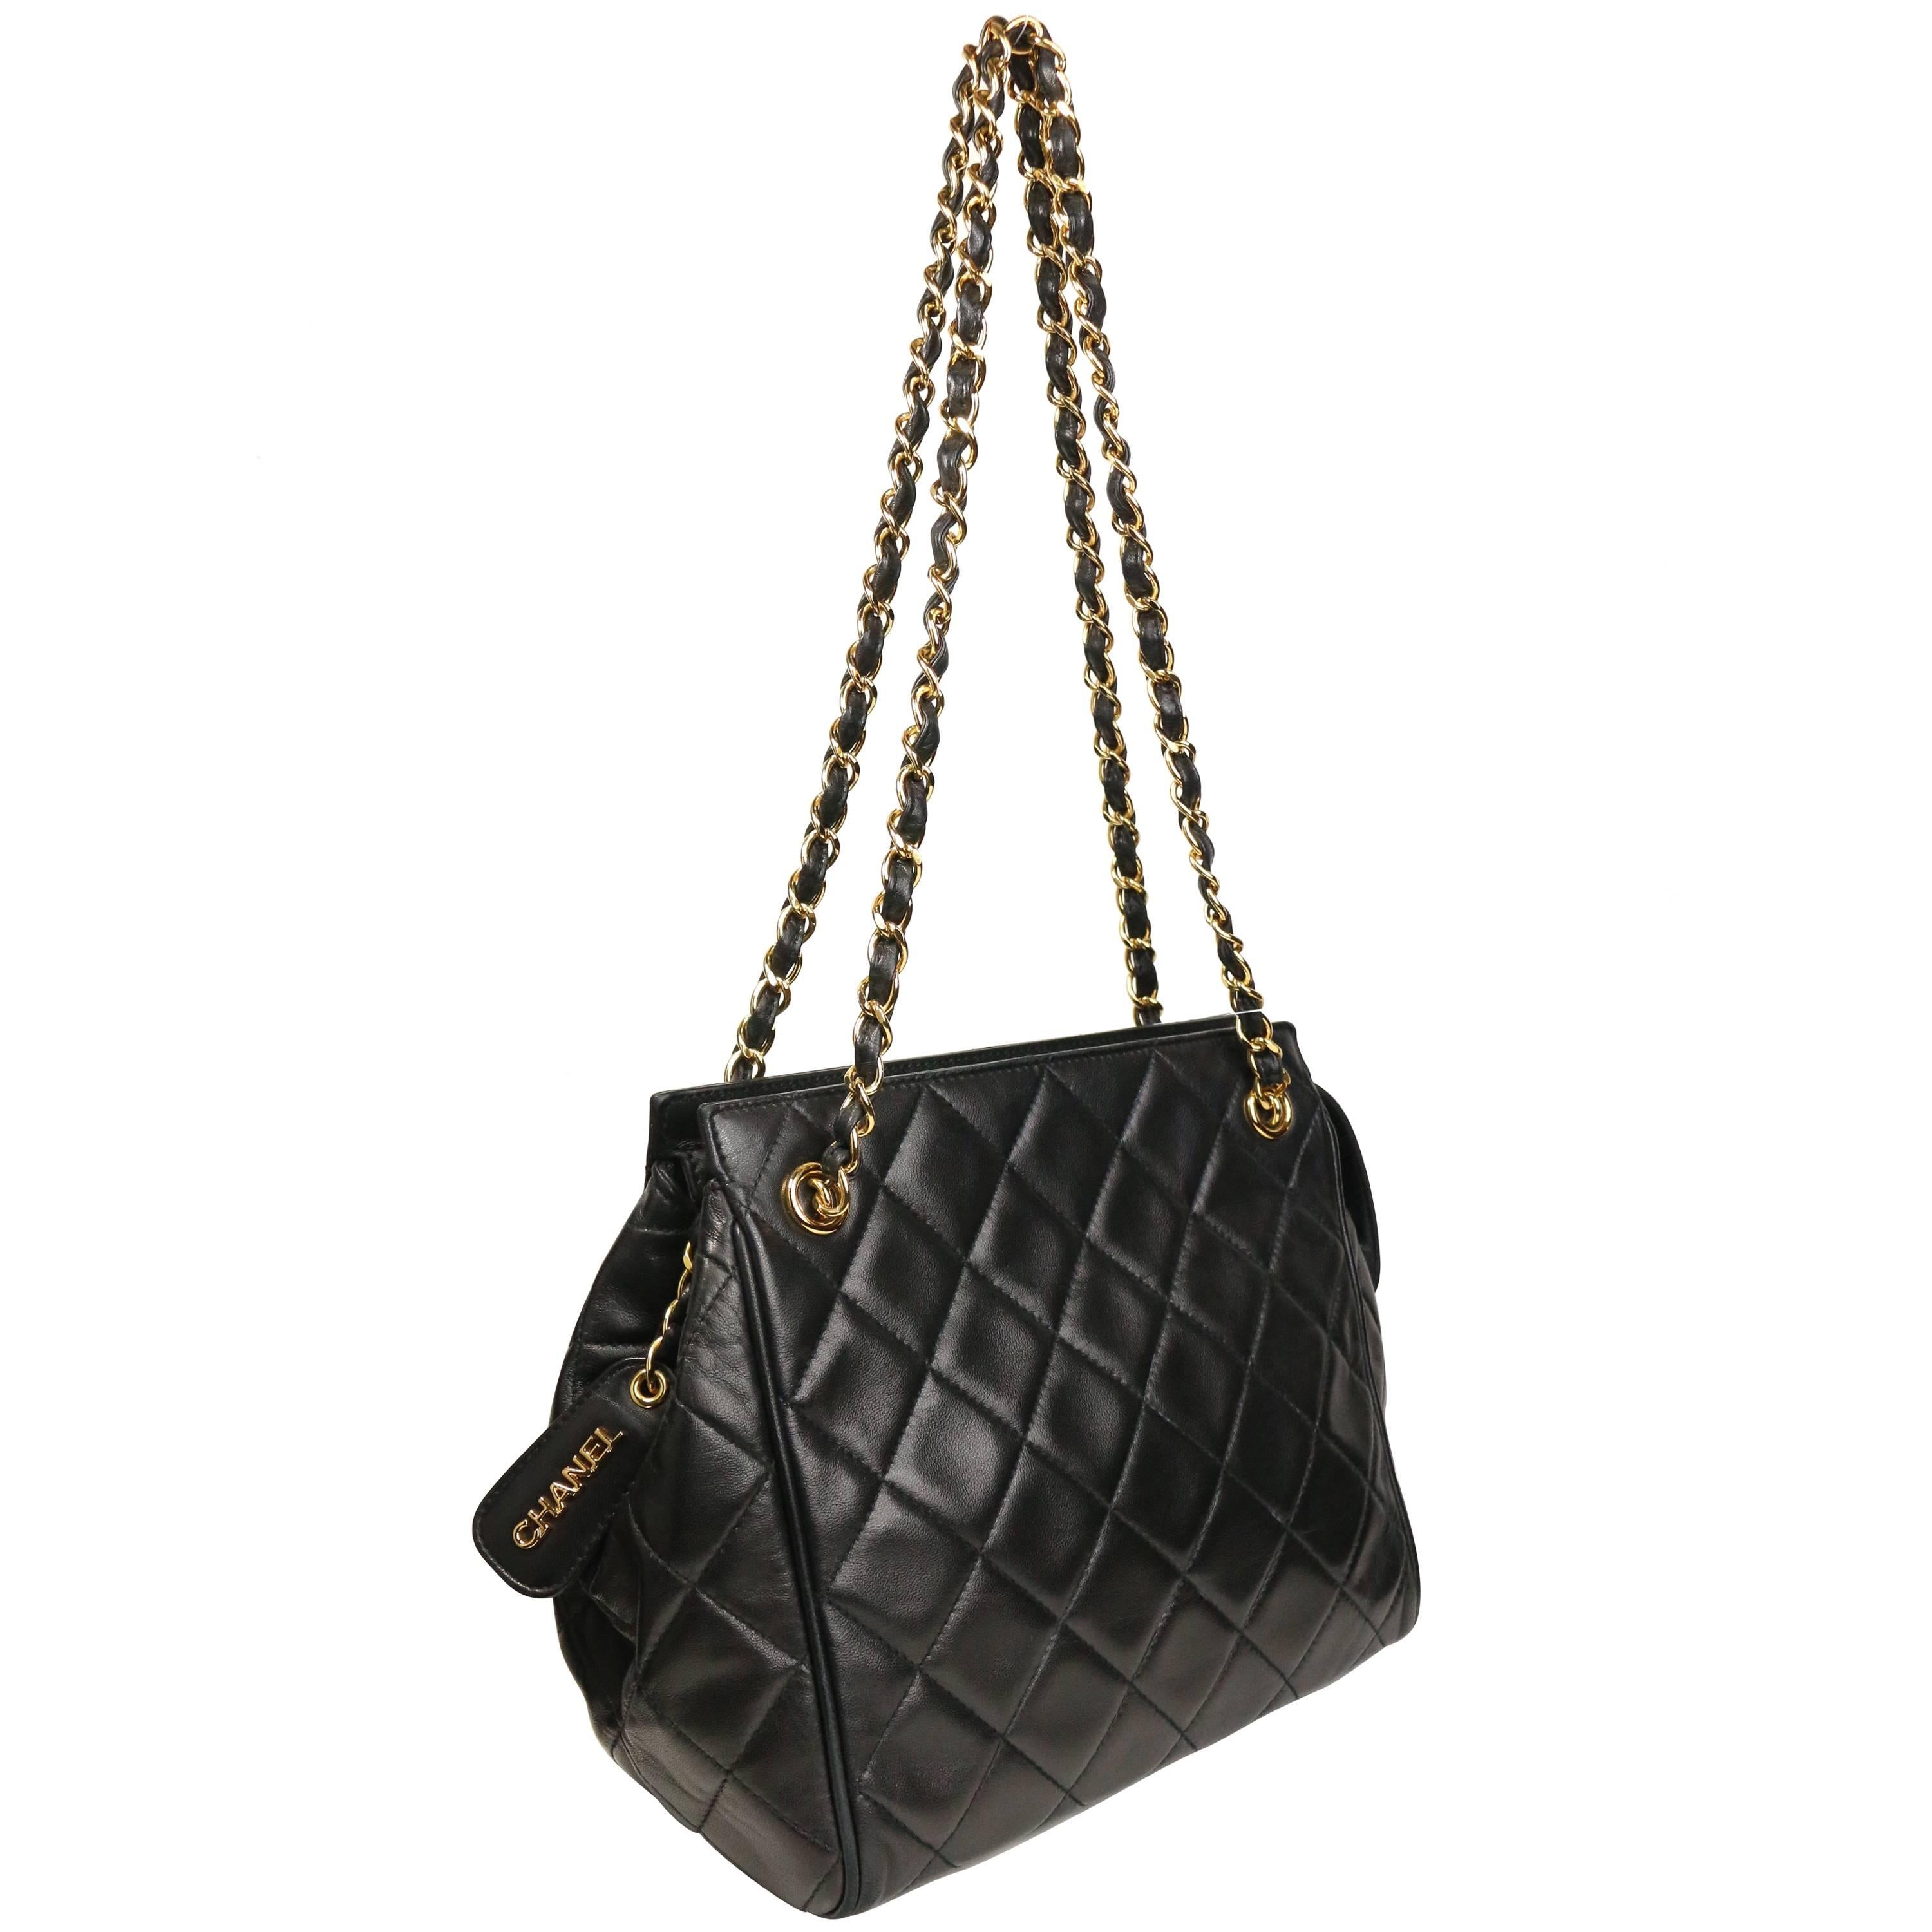 Chanel Black Quilted Lambskin Leather Petite Timeless Shoulder Strap Tote